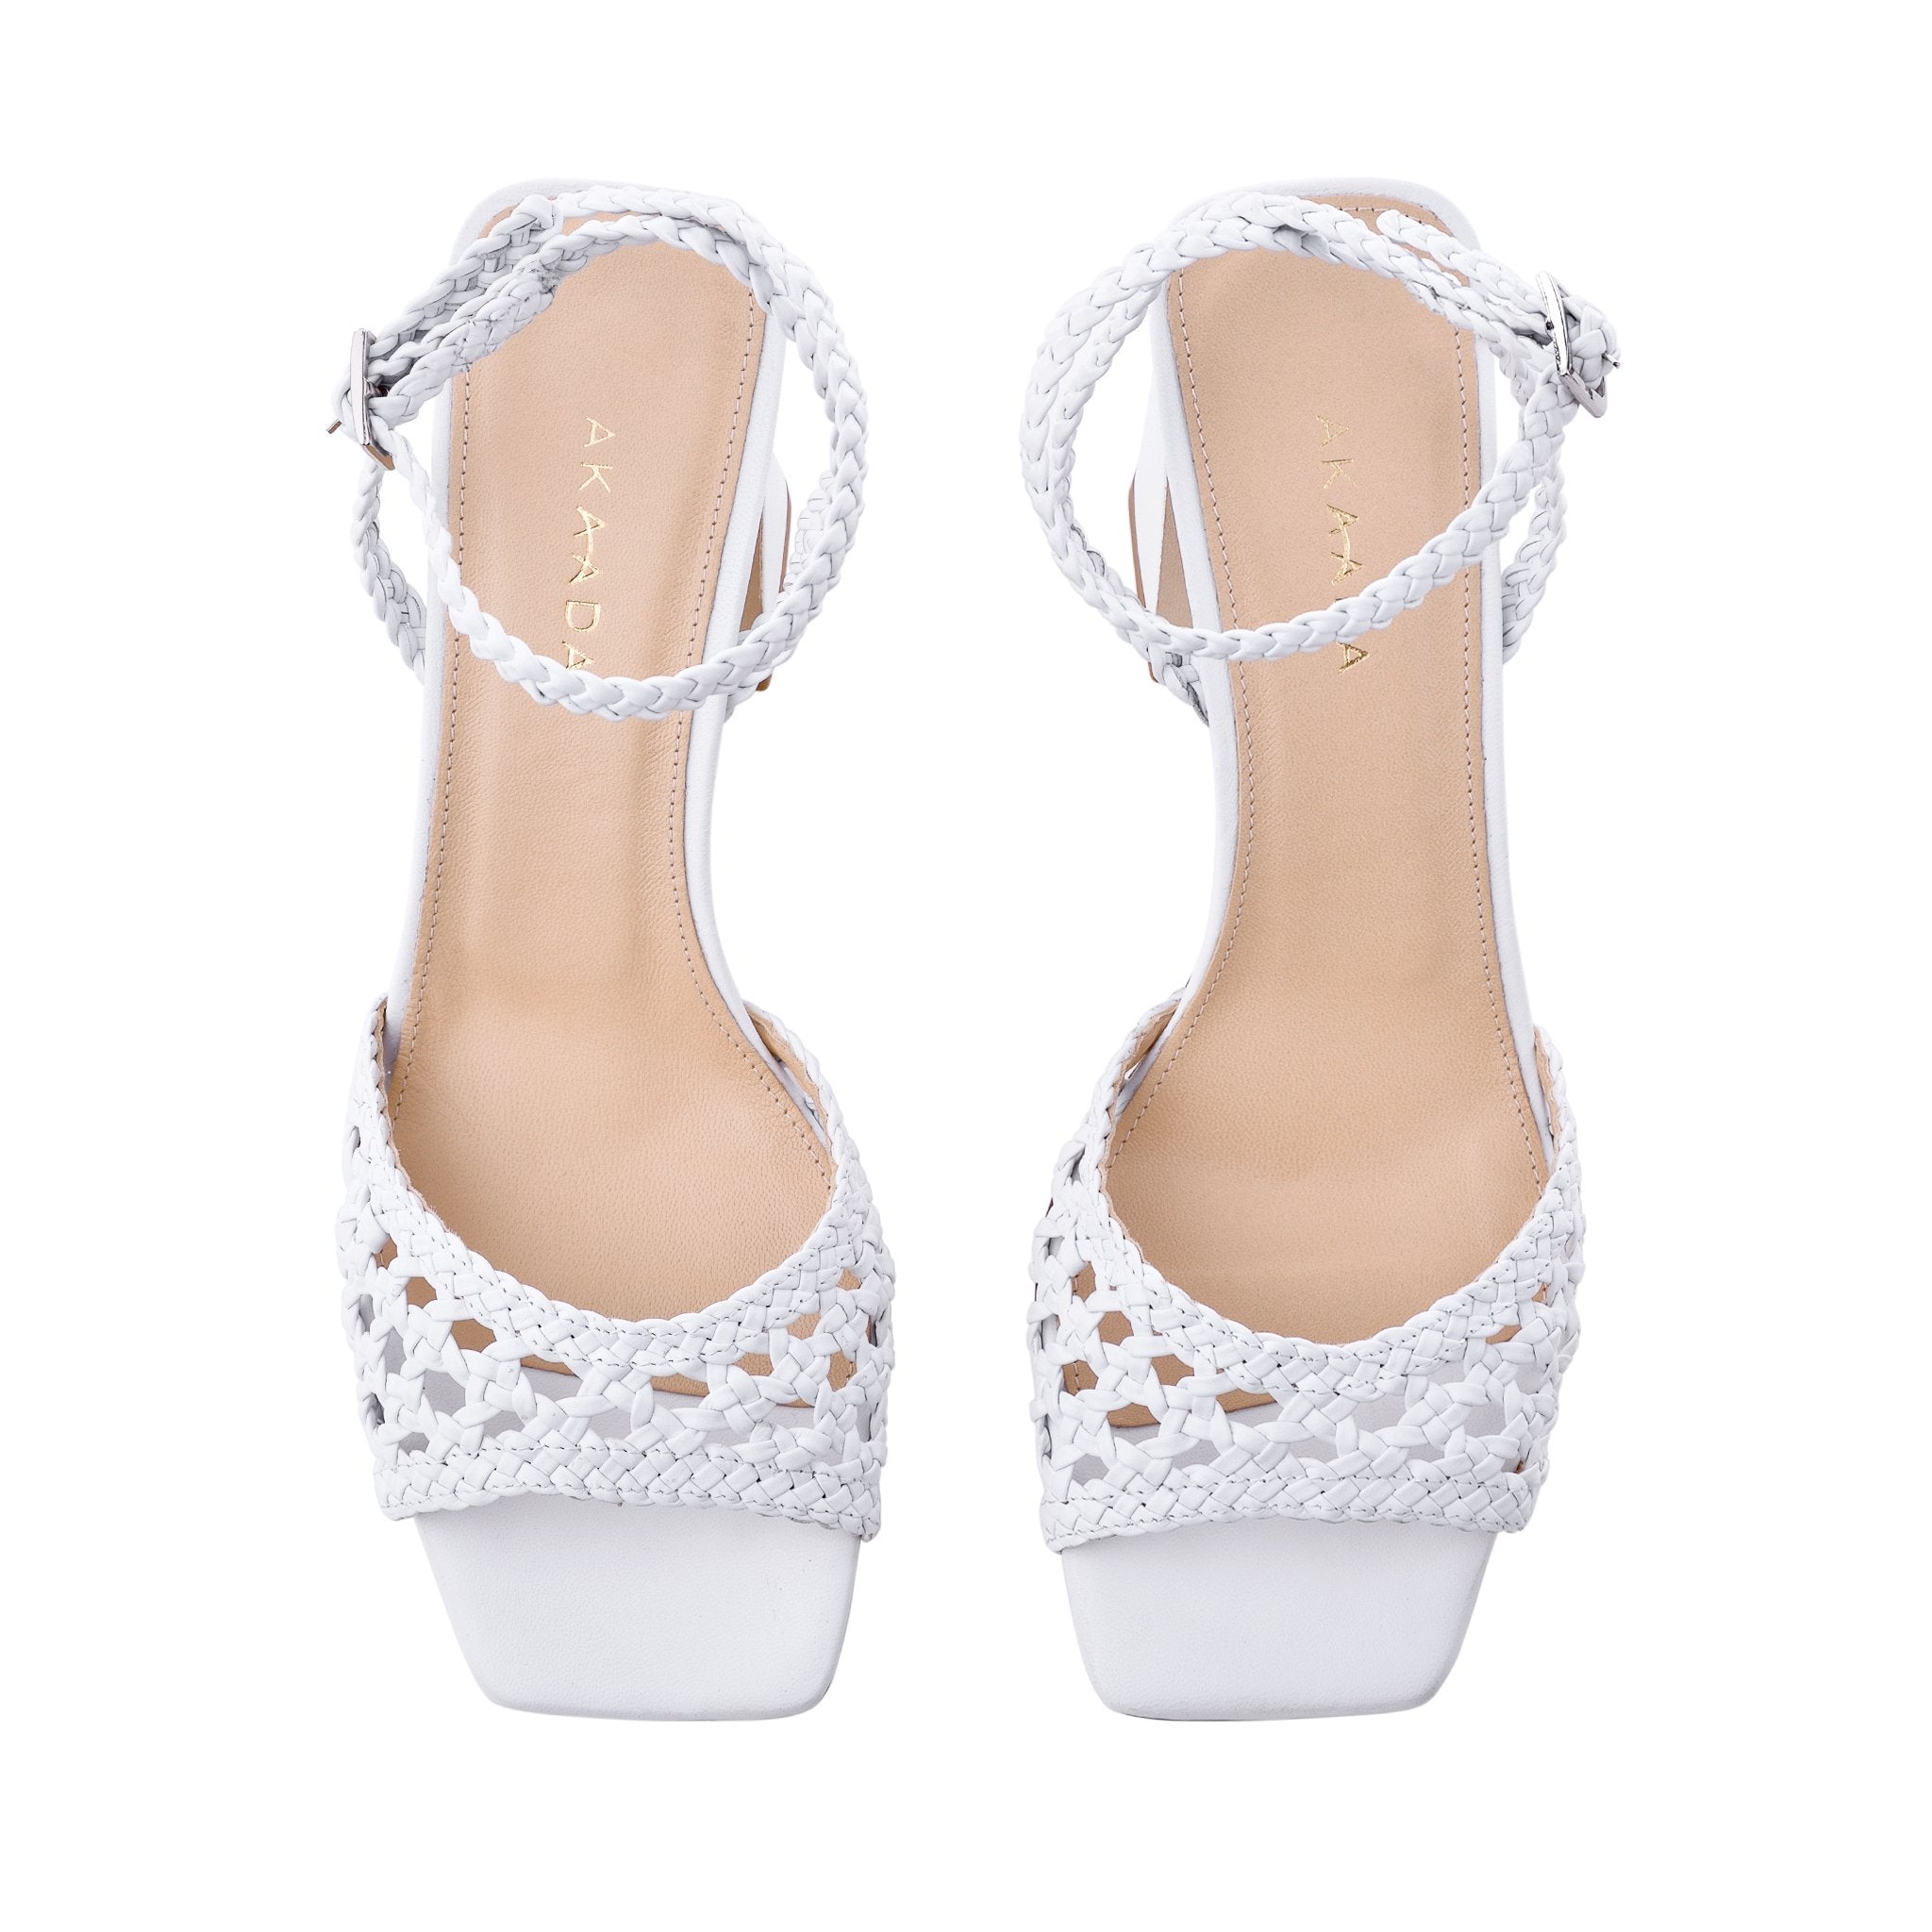 Tama White Woven Leather Sandals 1418-01 - 6